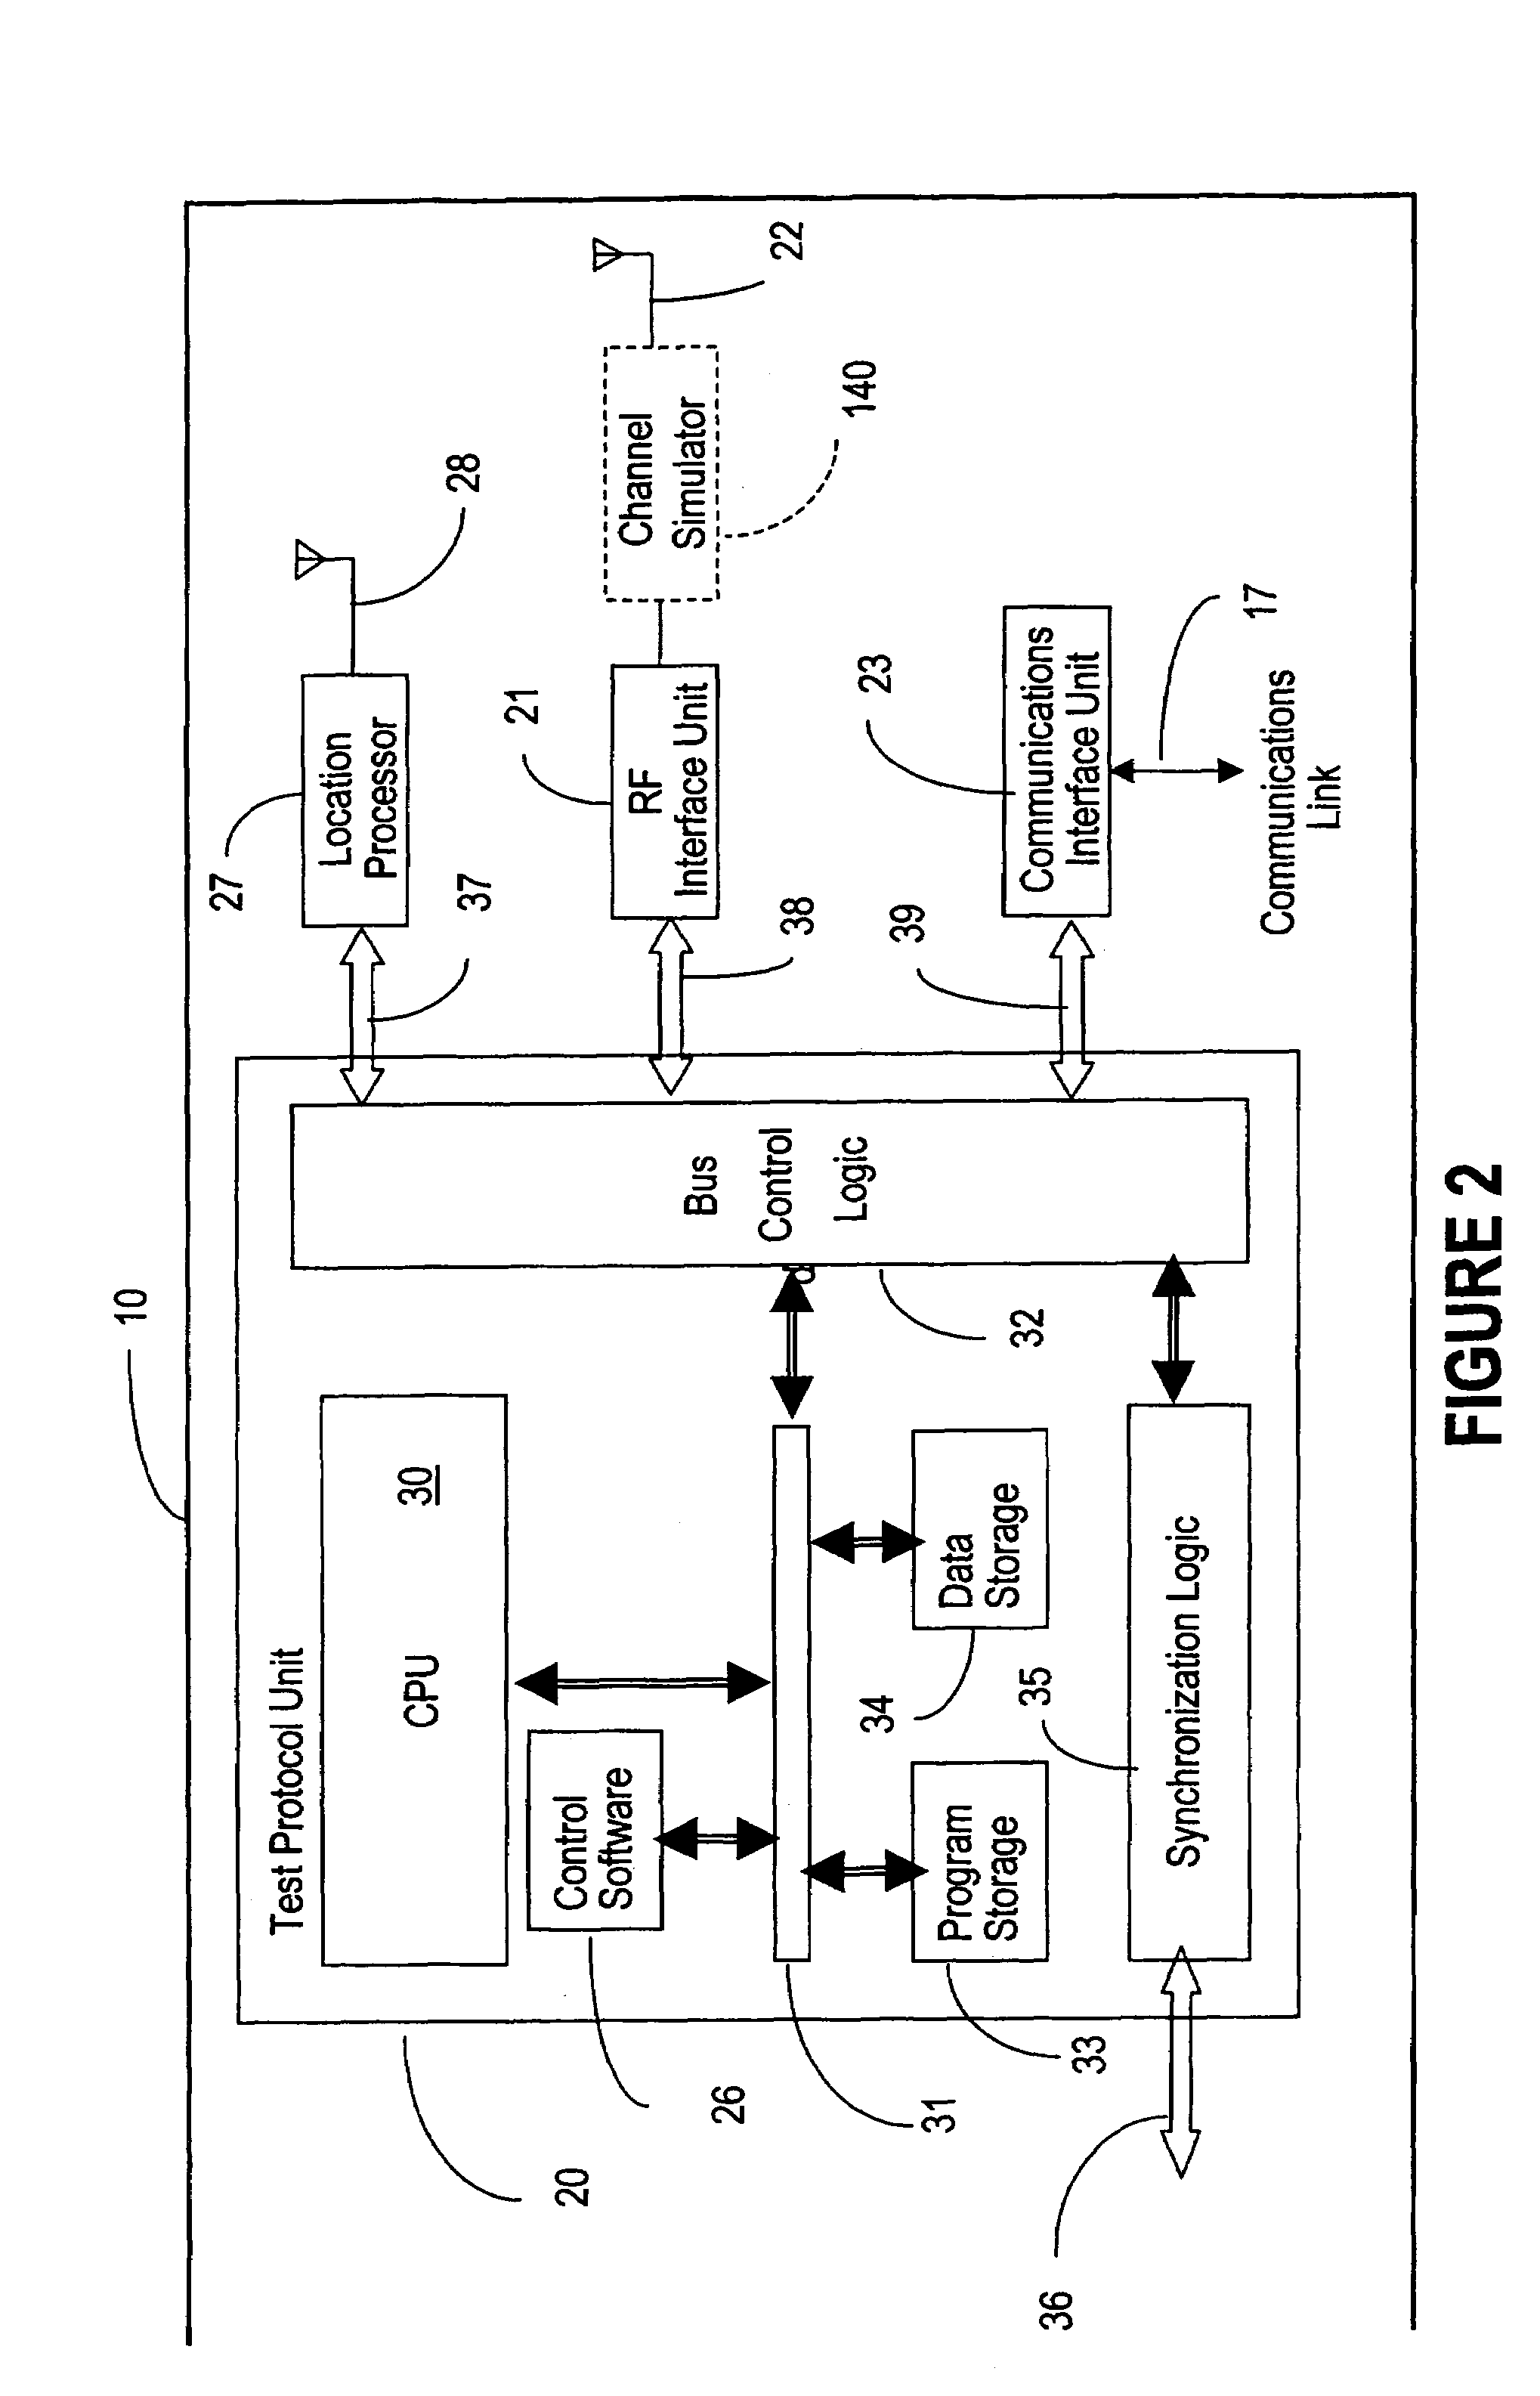 Location-based testing for wireless data communication networks